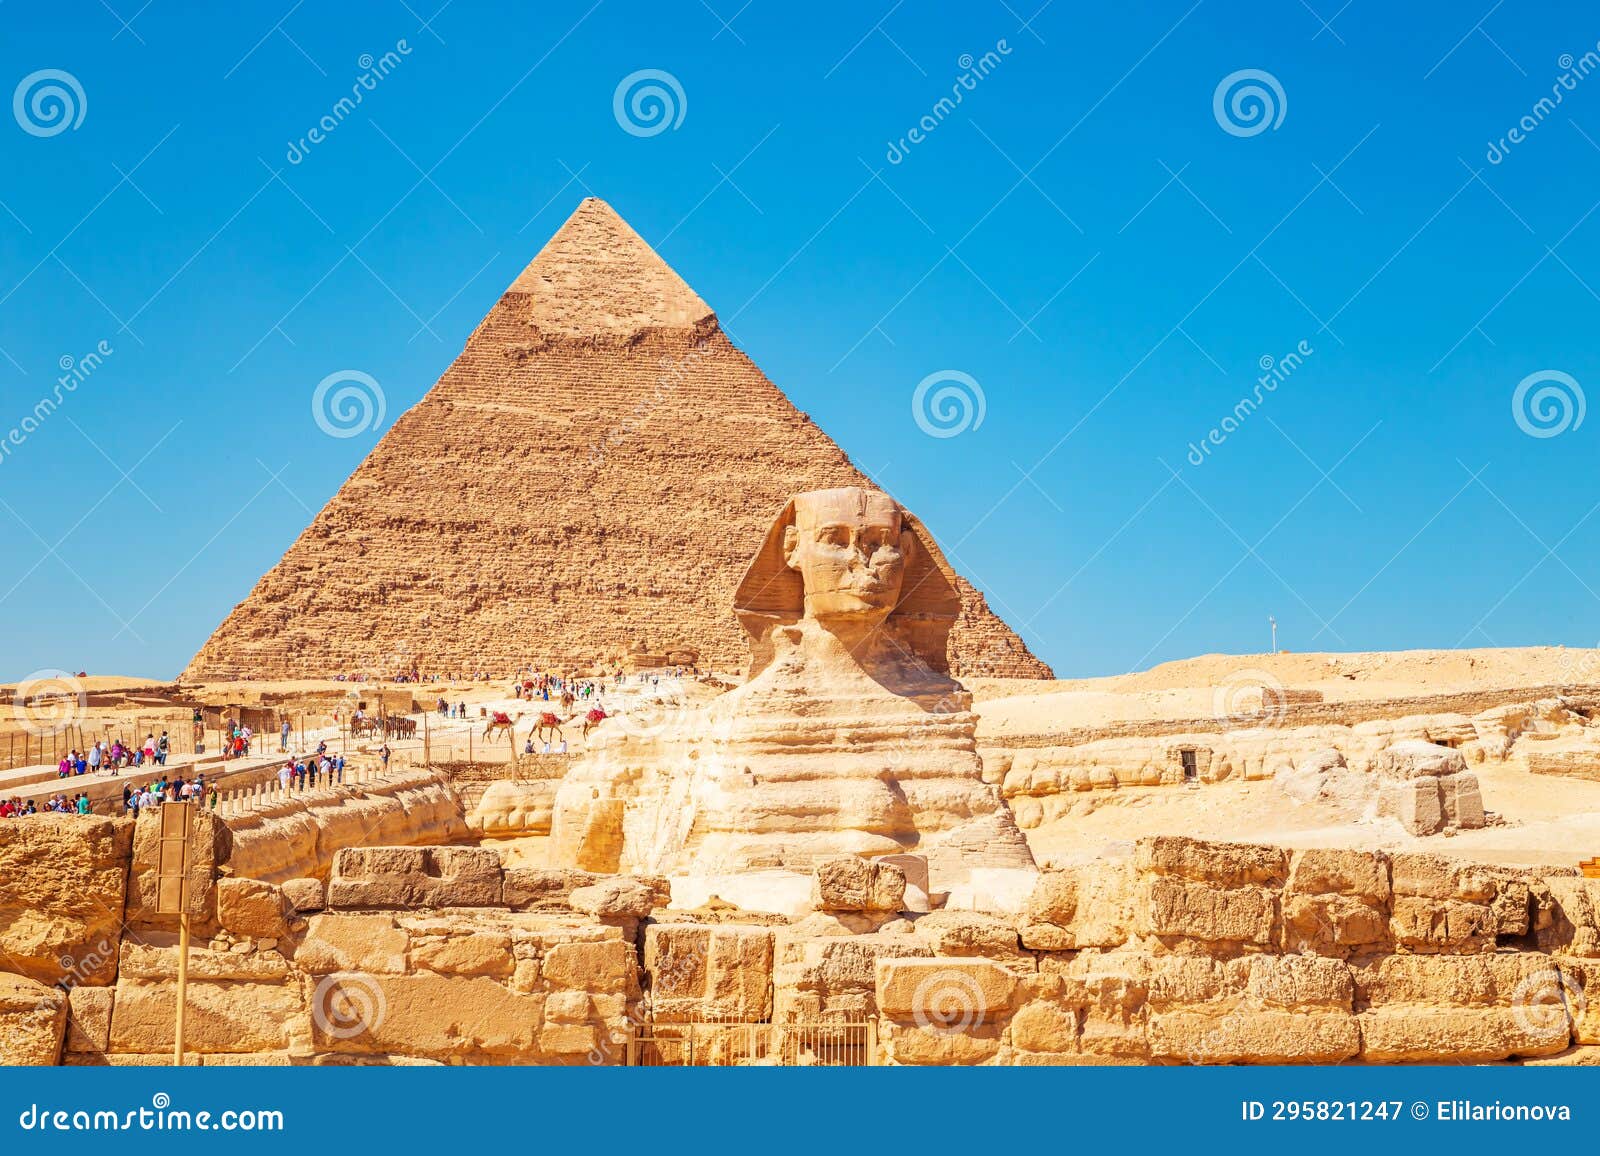 Pyramid Of Khafre And The Great Sphinx Great Egyptian Pyramids Editorial Photography Image Of 4694